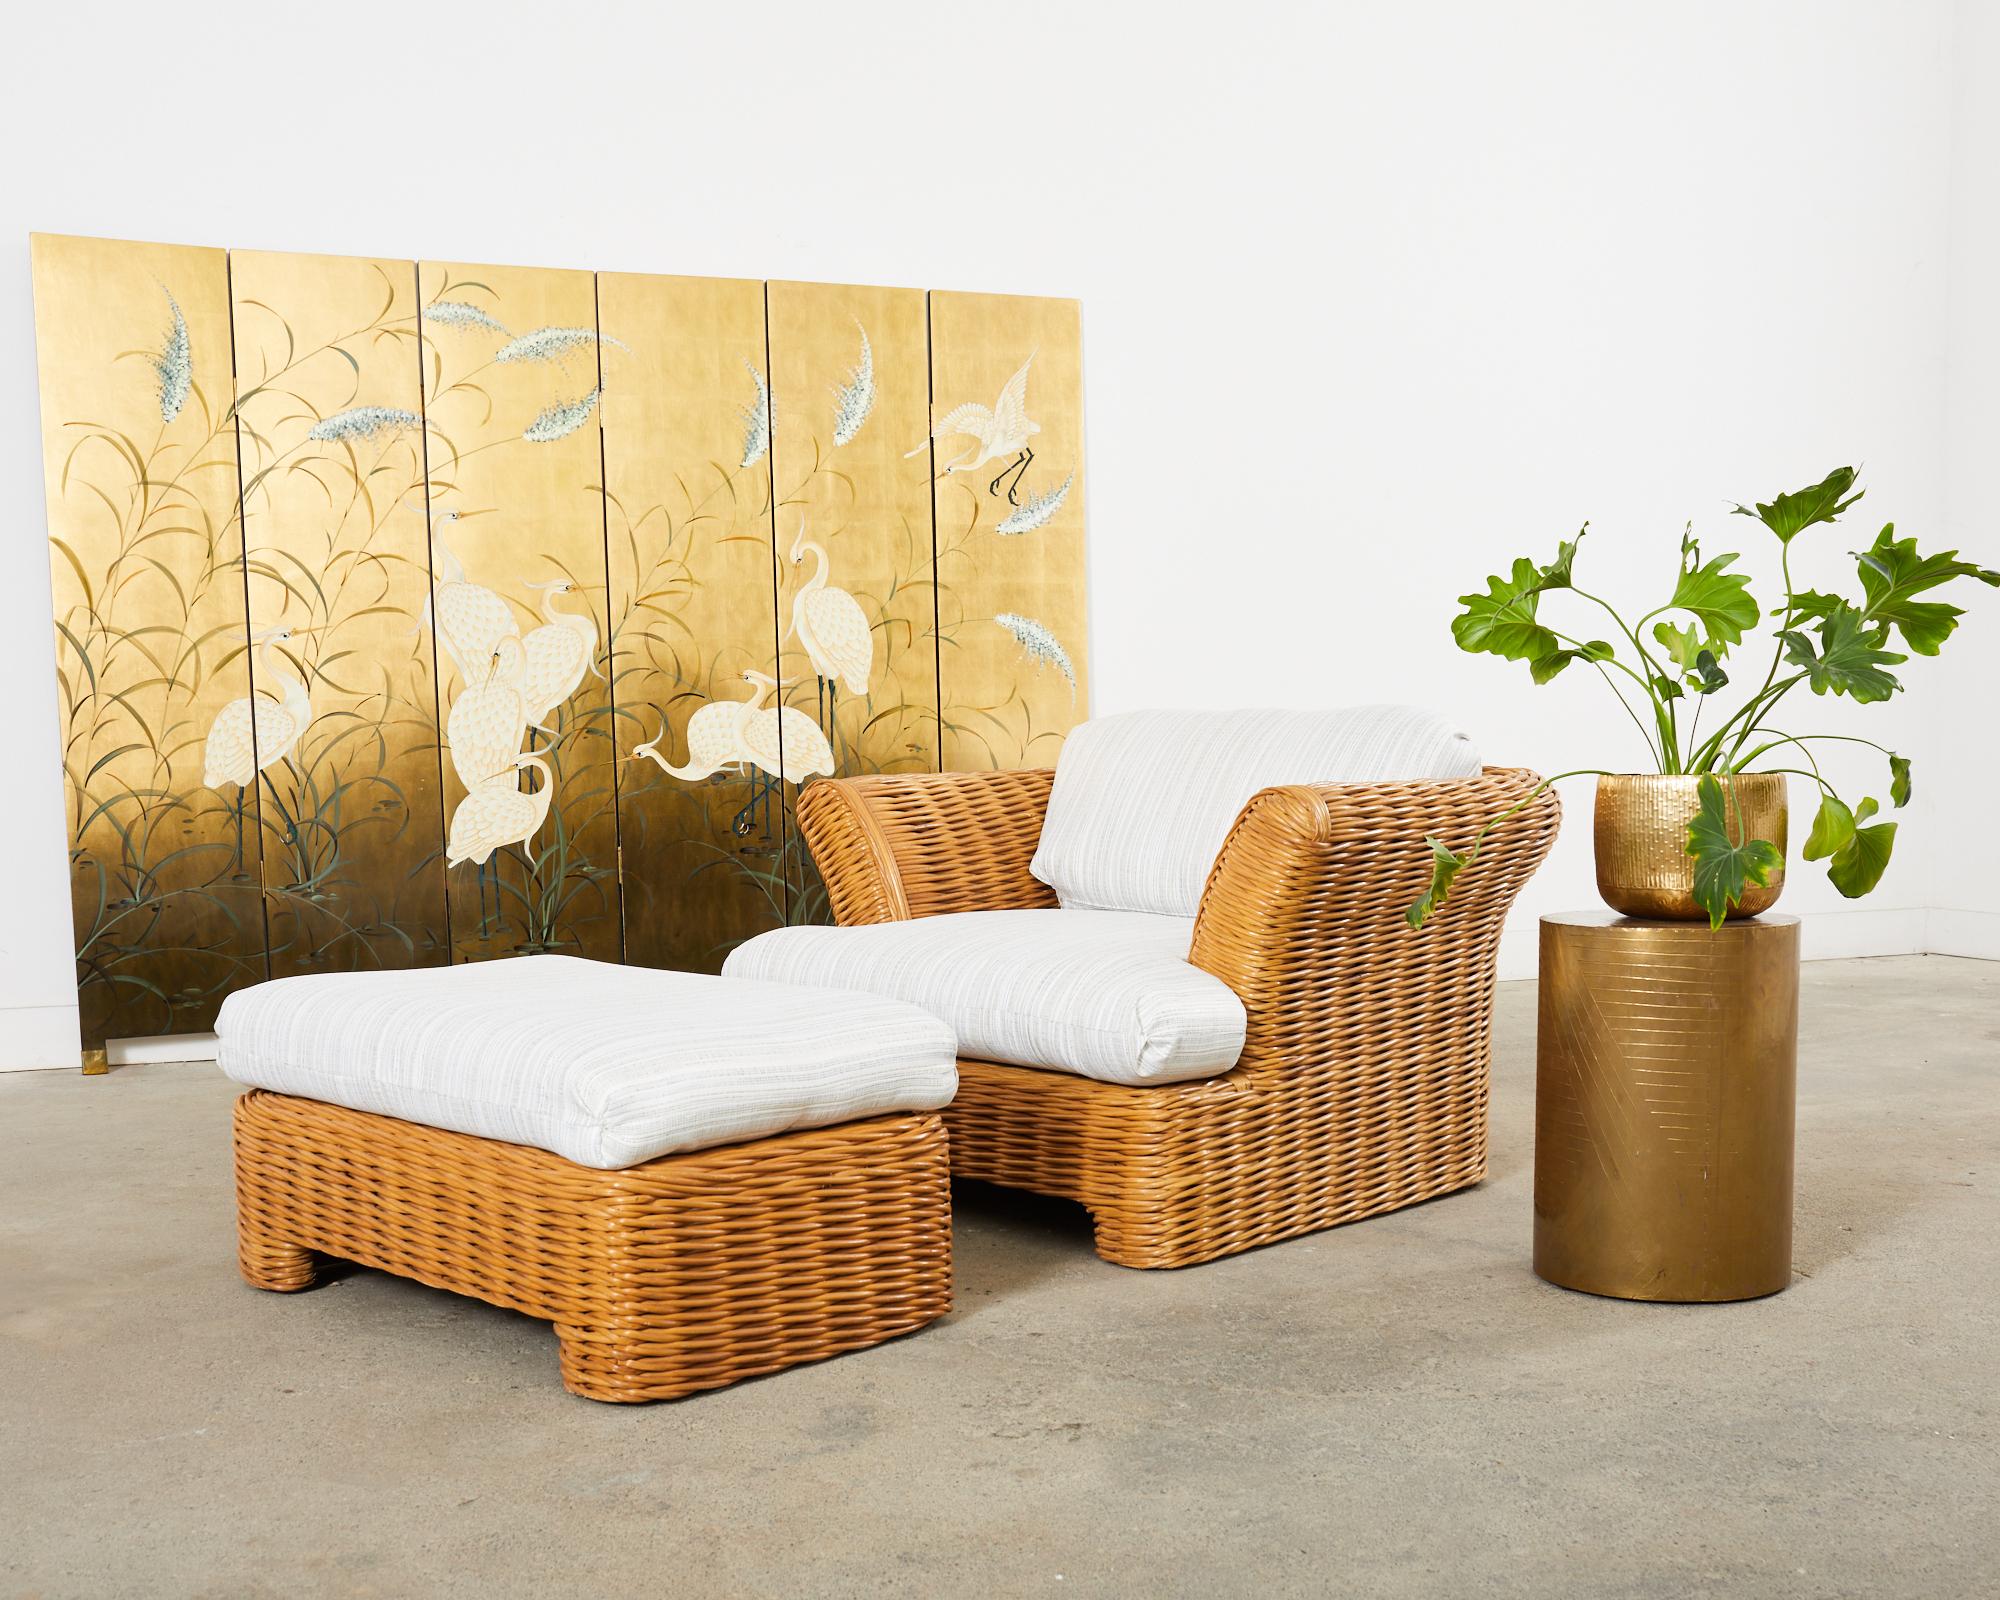 Oversized organic modern lounge chair and ottoman crafted from thick pencil reed woven rattan in the California coastal style and manner of Michael Taylor. The chair features a large frame with dramatic flared arms. Newly upholstered fabric on the